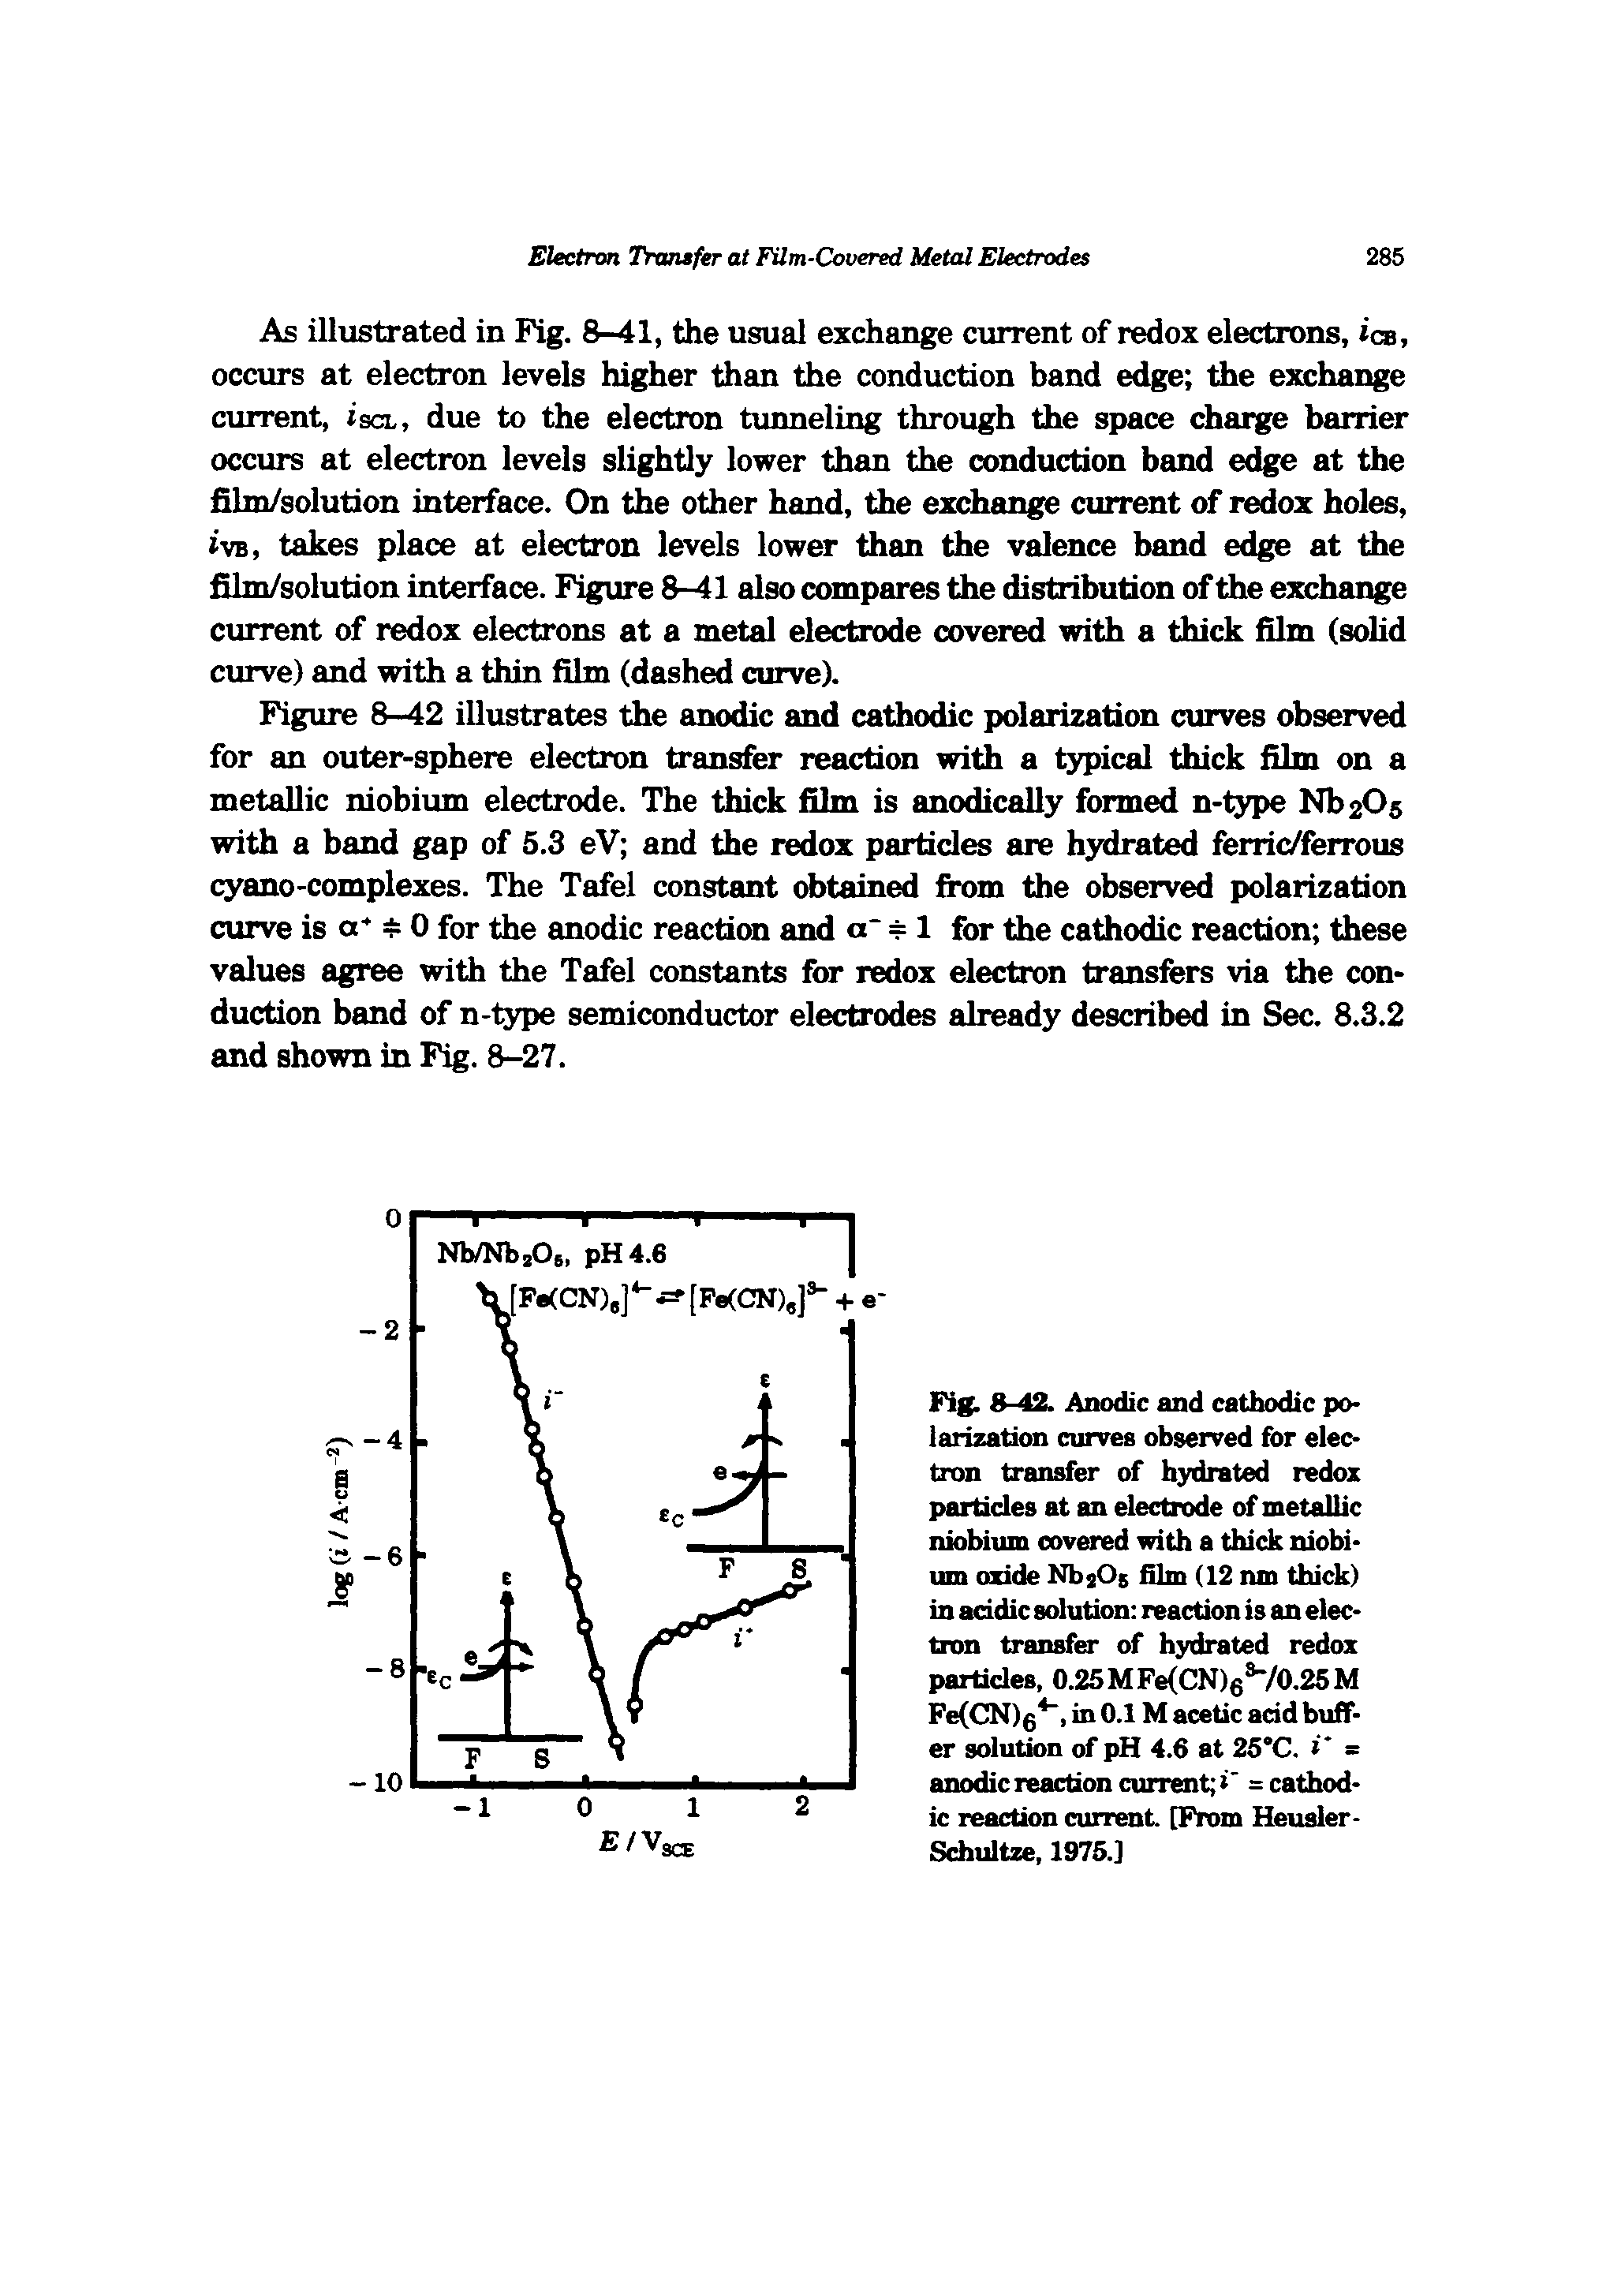 Fig. 8-42. Anodic and cathodic polarization curves observed for electron transfer of hydrated redox particles at an electrode of metallic niobium covered with a thick niobium oxide NbsOs film (12 nm thick) in acidic solution reaction is an electron transfer of hydrated redox particles, 0.25MFe(CN)6 /0.25M Fe(CN)g, in 0.1 M acetic add buffer solution of pH 4.6 at 25 C. =...